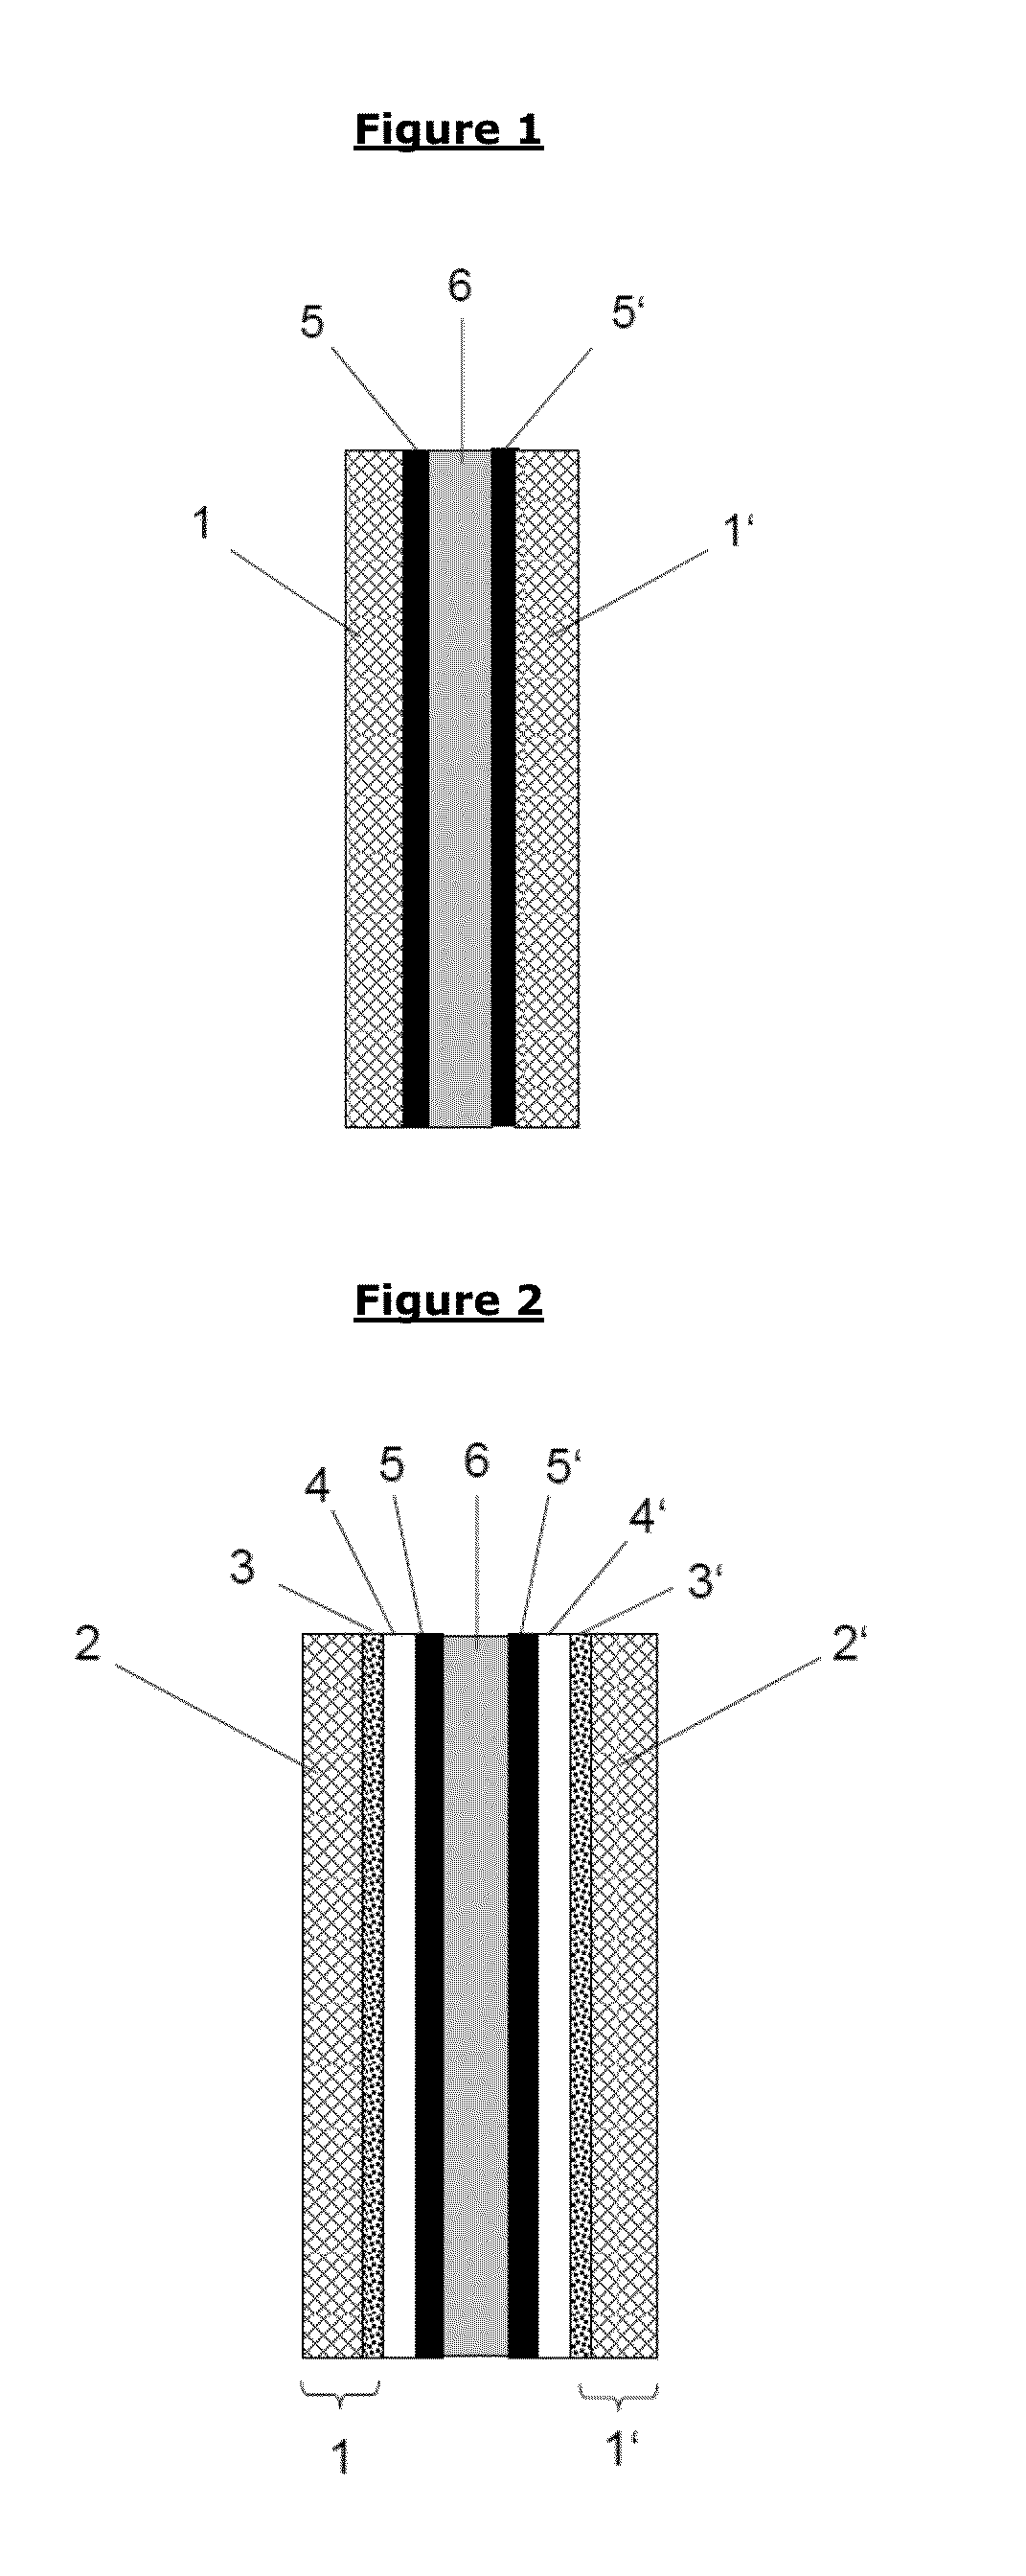 Barrier layer for corrosion protection in electrochemical devices